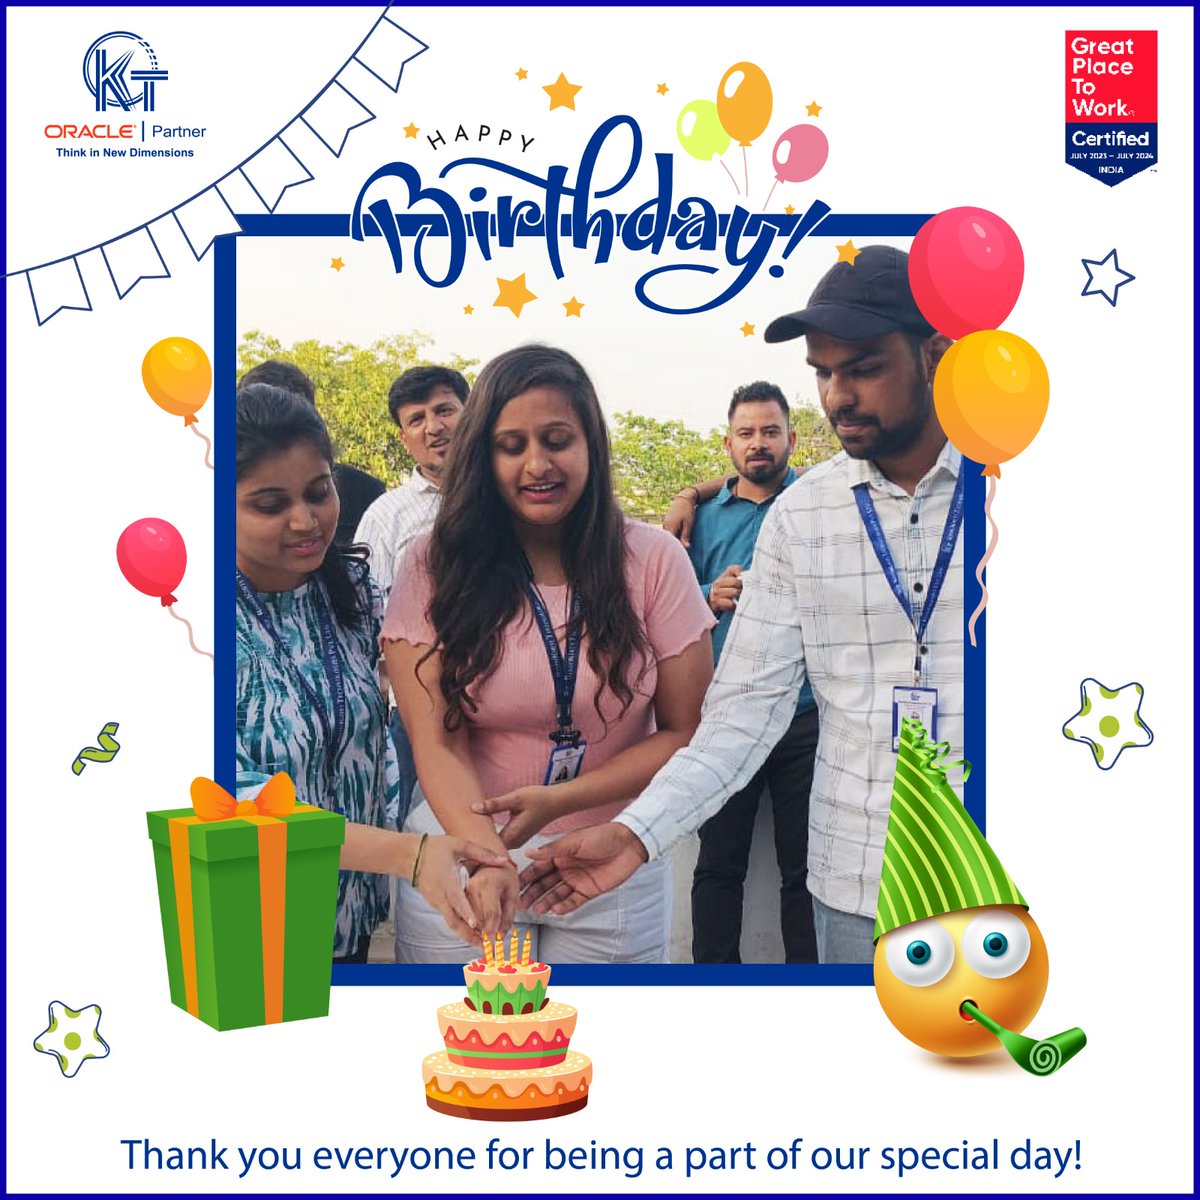 Another unforgettable birthday bash!  Cheers to our incredible team member, spreading joy in the workplace every single day! #CelebrationVibes #JoyfulMoments #TeamBonding